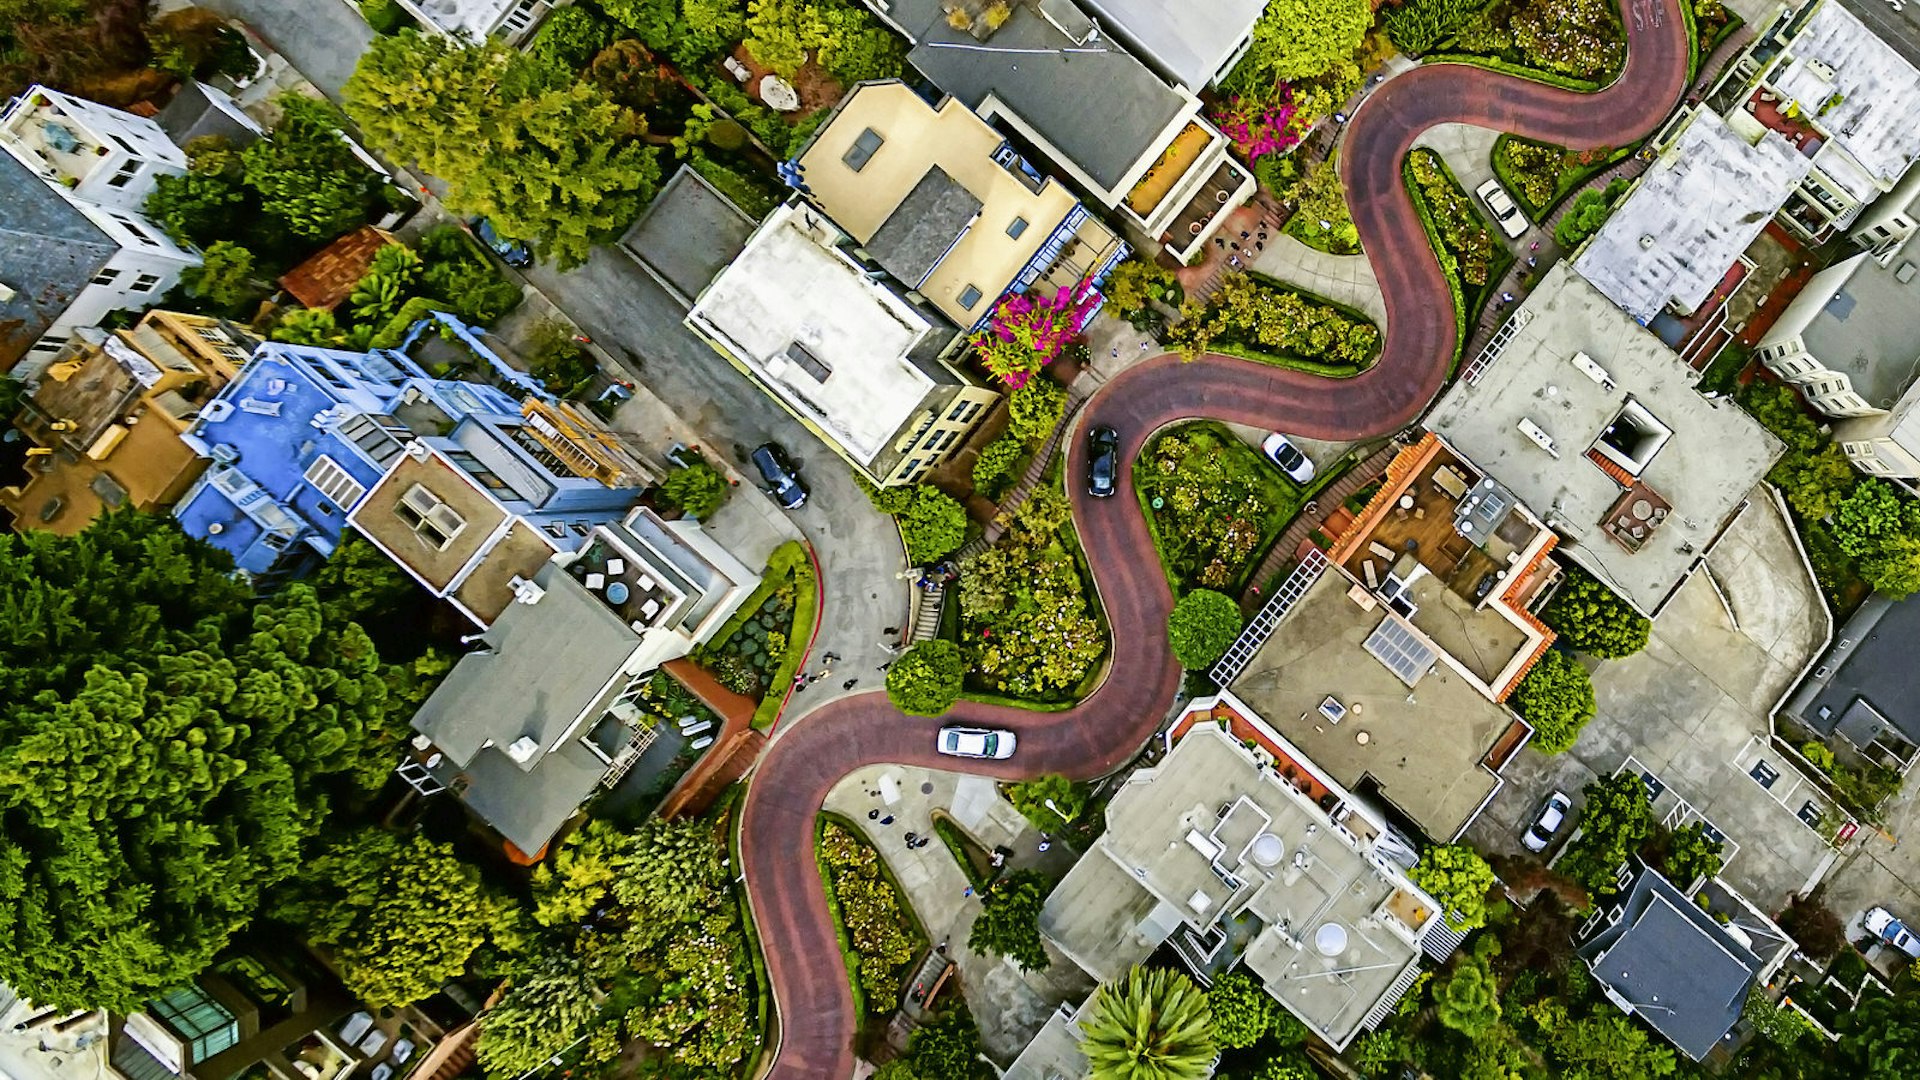 Aerial view of a residential city area, with road descending a hillside with eight hairpin turns.